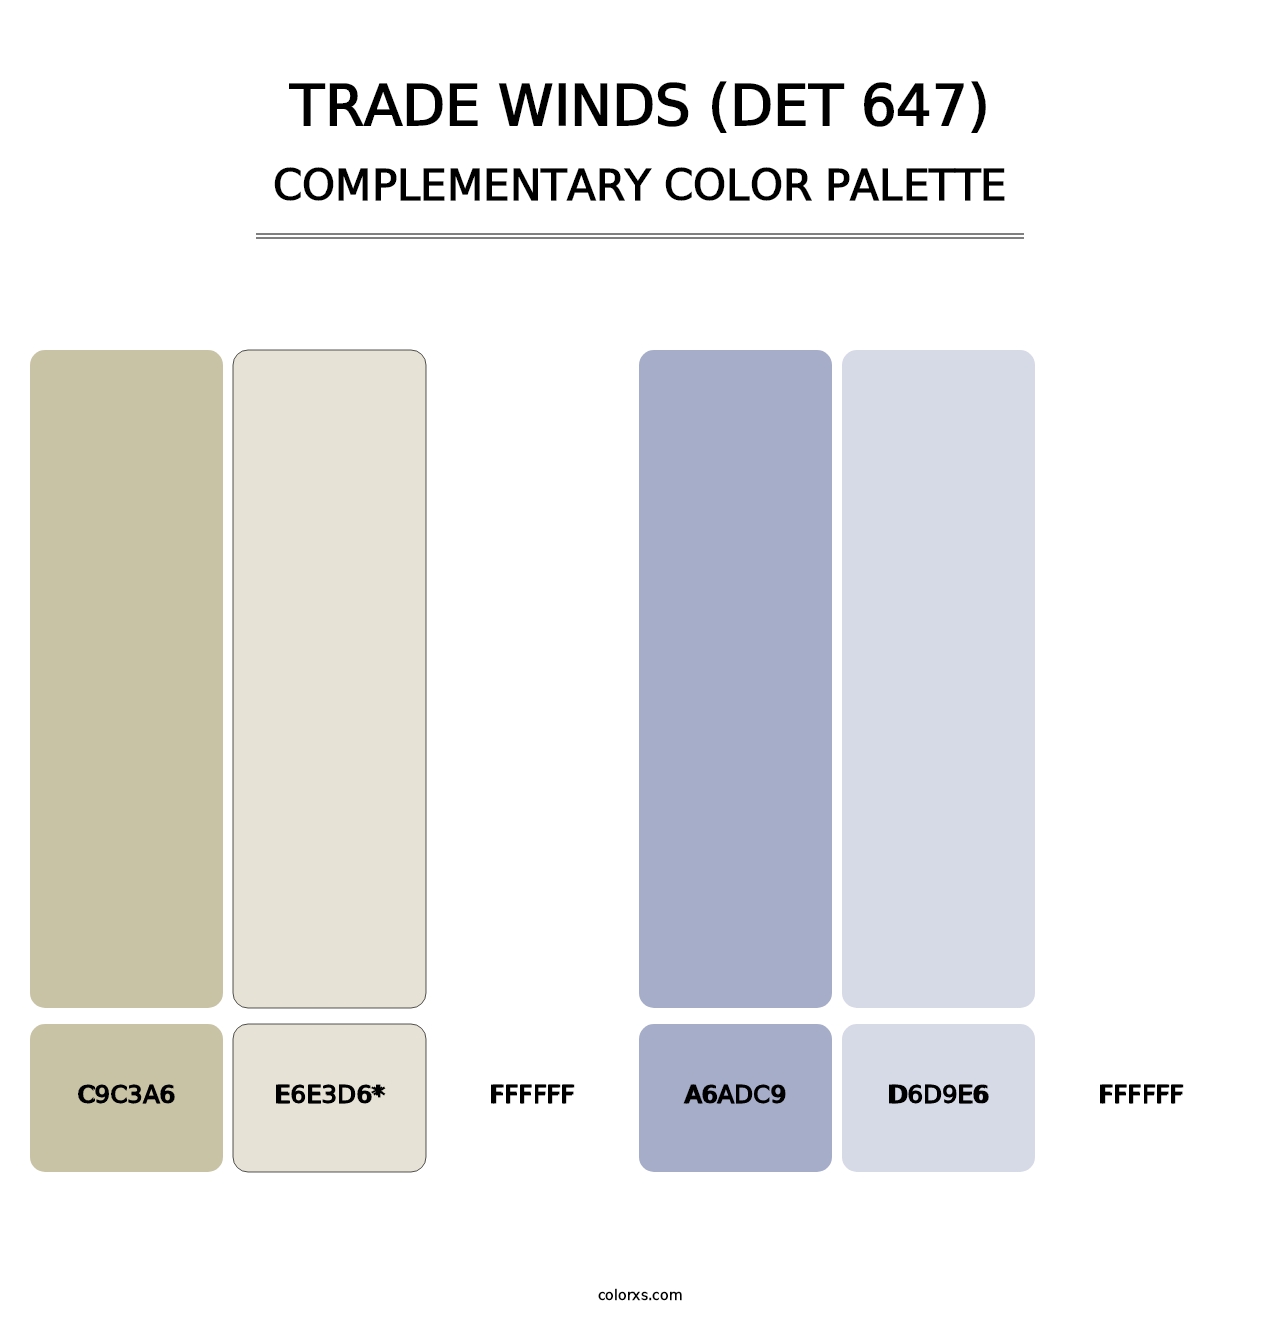 Trade Winds (DET 647) - Complementary Color Palette